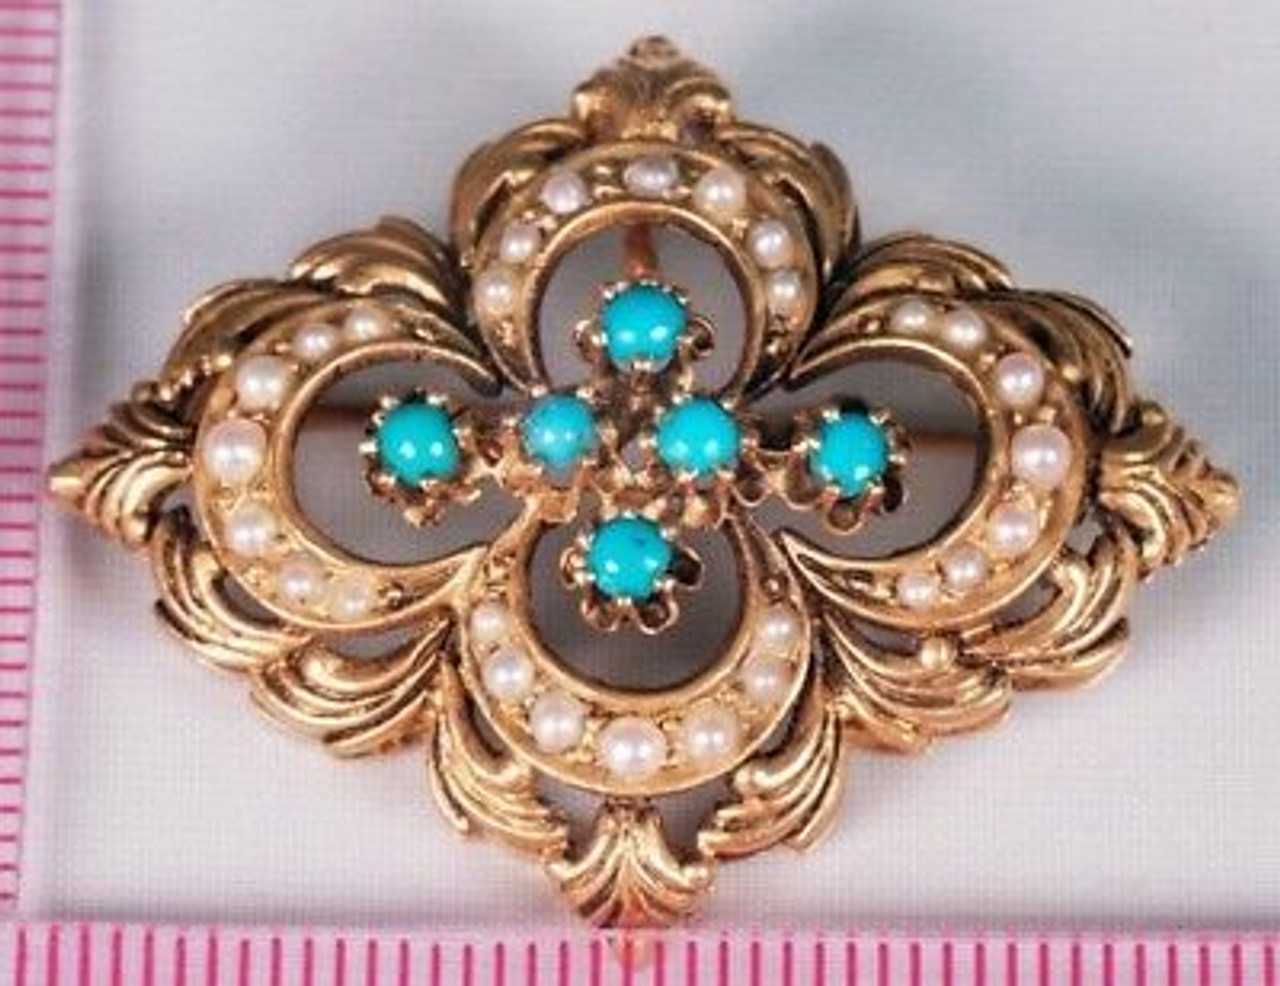 Vintage 14K Yellow Gold Turquoise & Seed Pearl Floral Brooch/Pin - Ruby Lane